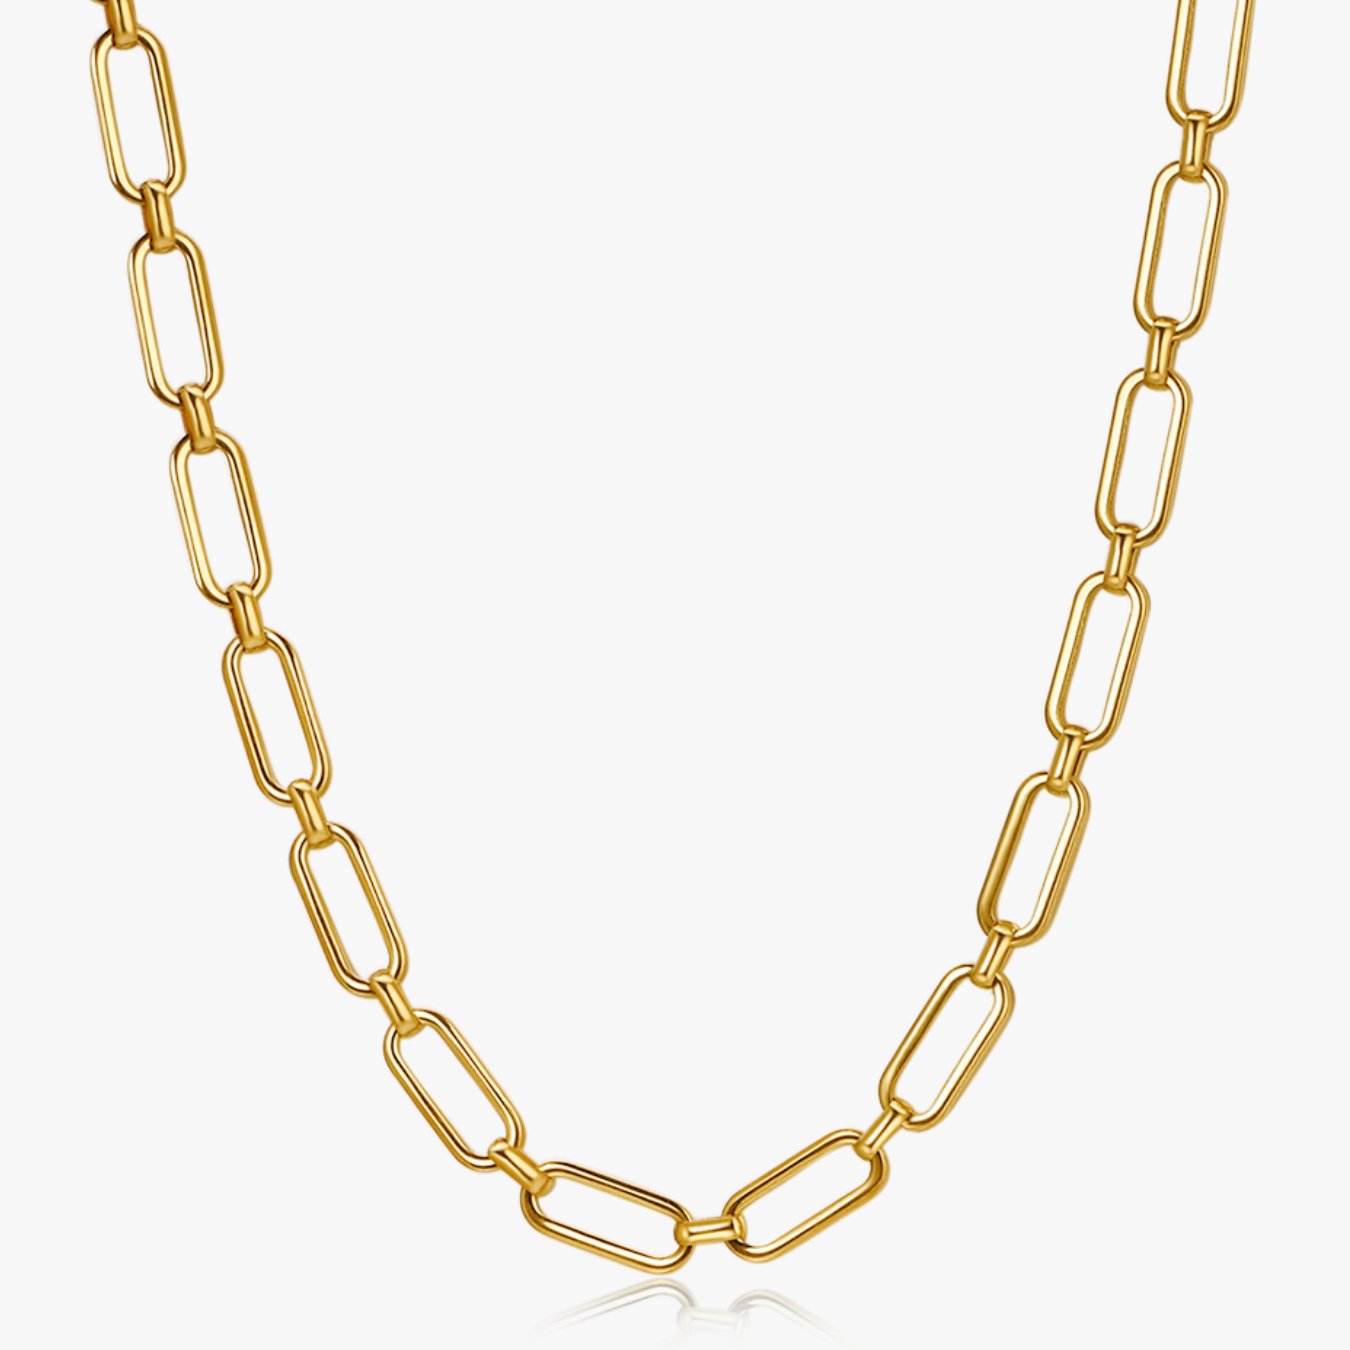 Casey Gold Chain - Flaire & Co.